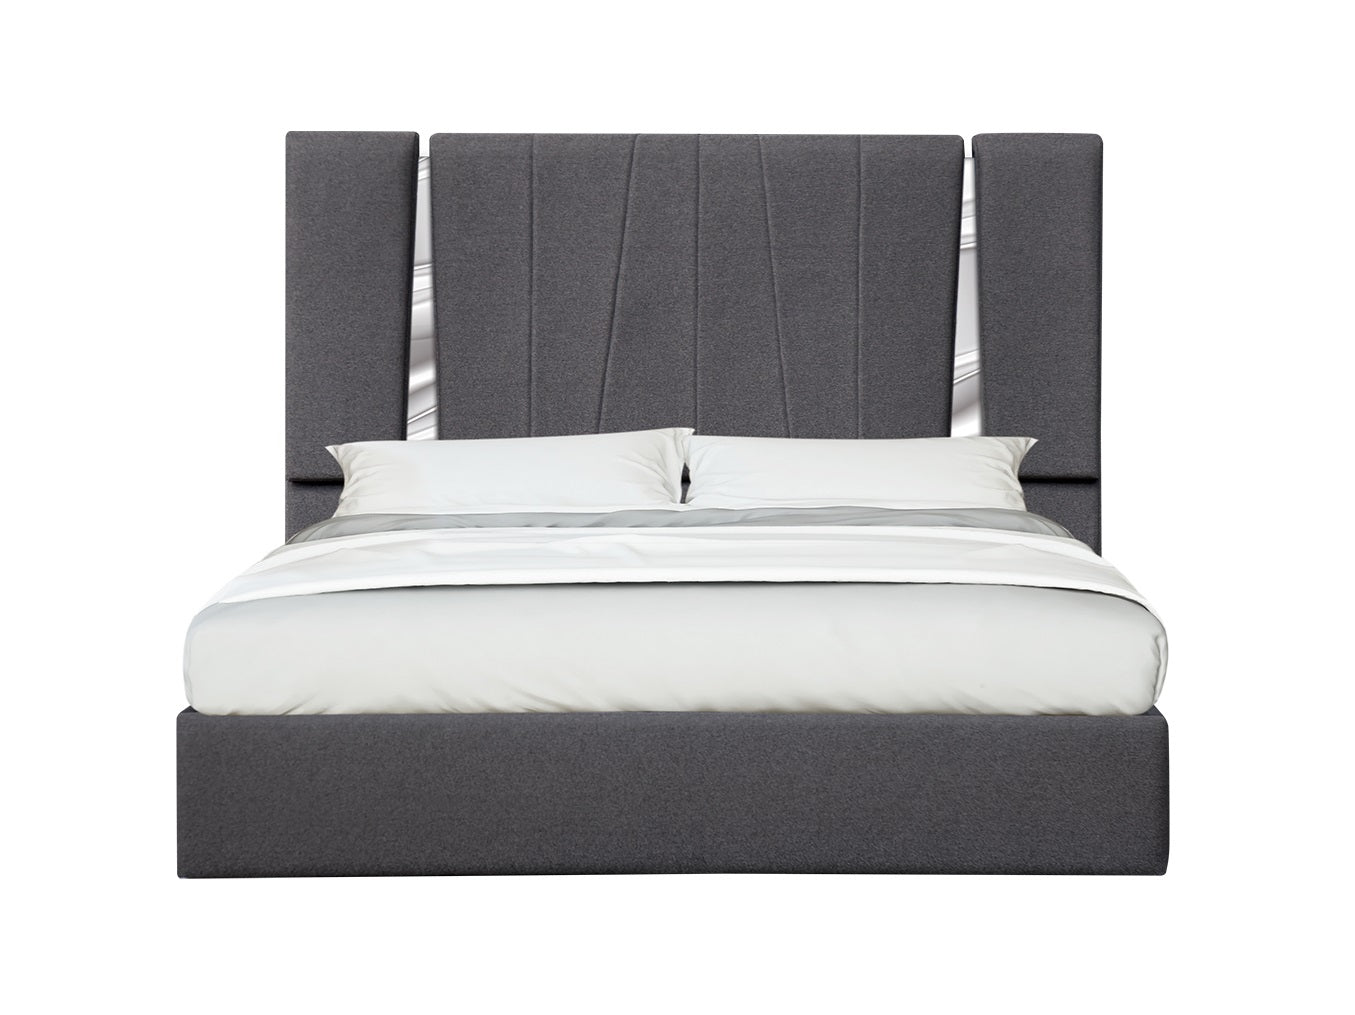 Matisse King Bed Charcoal by JM